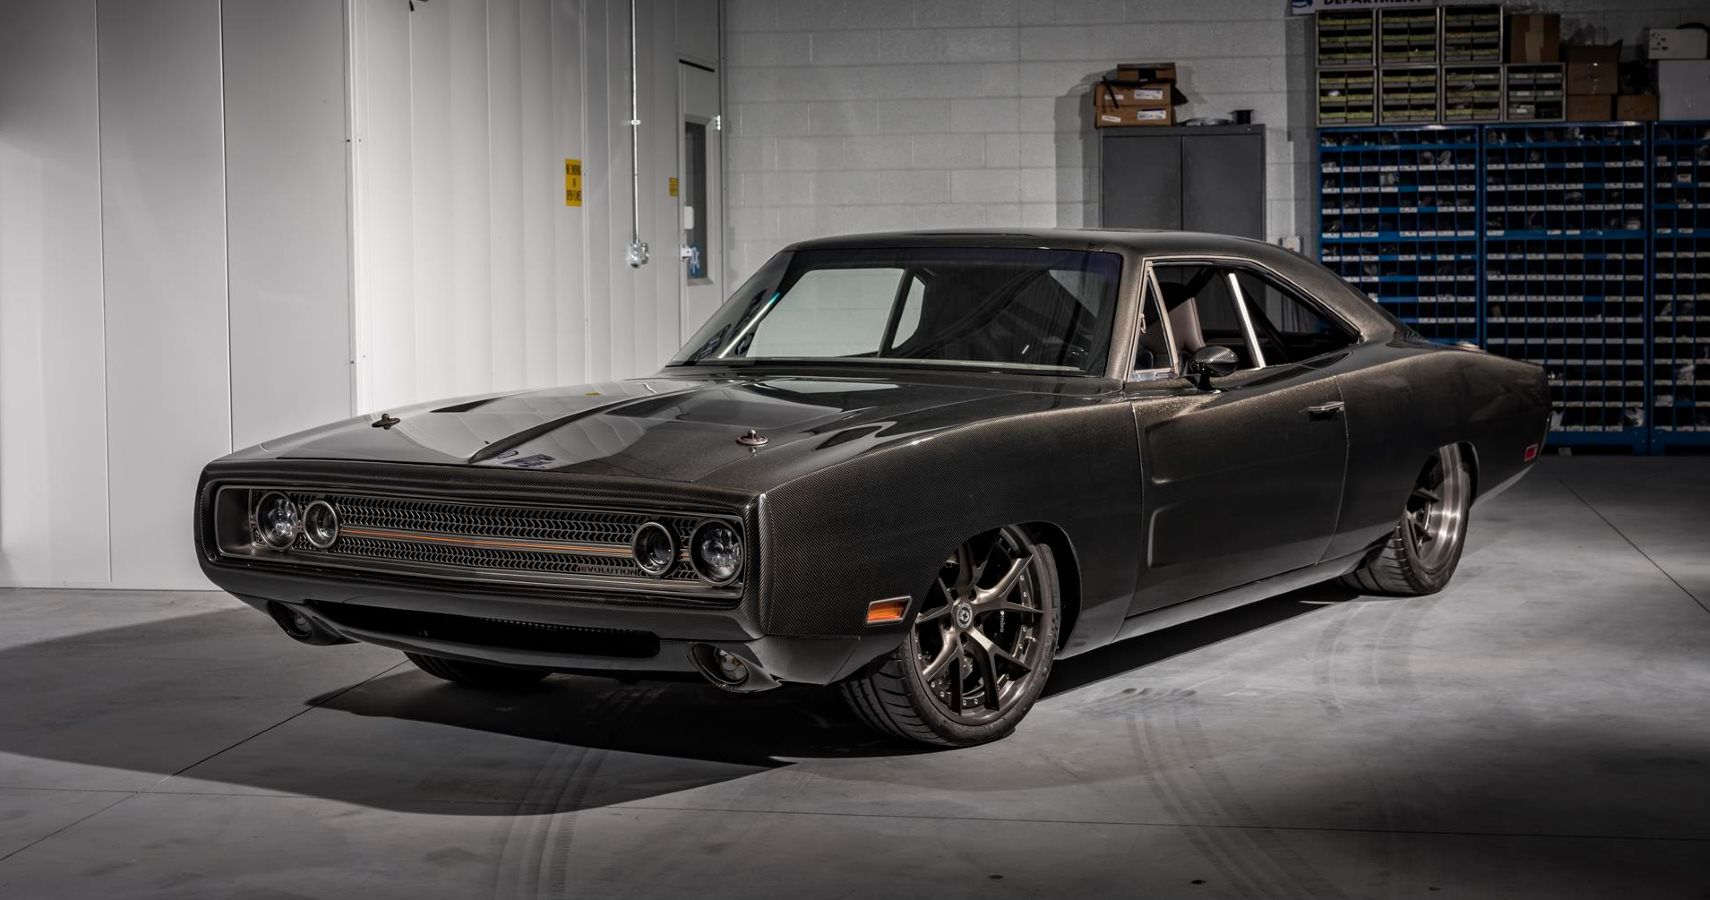 1970 Dodge Charger Gets Insane Horsepower From Demon Engine